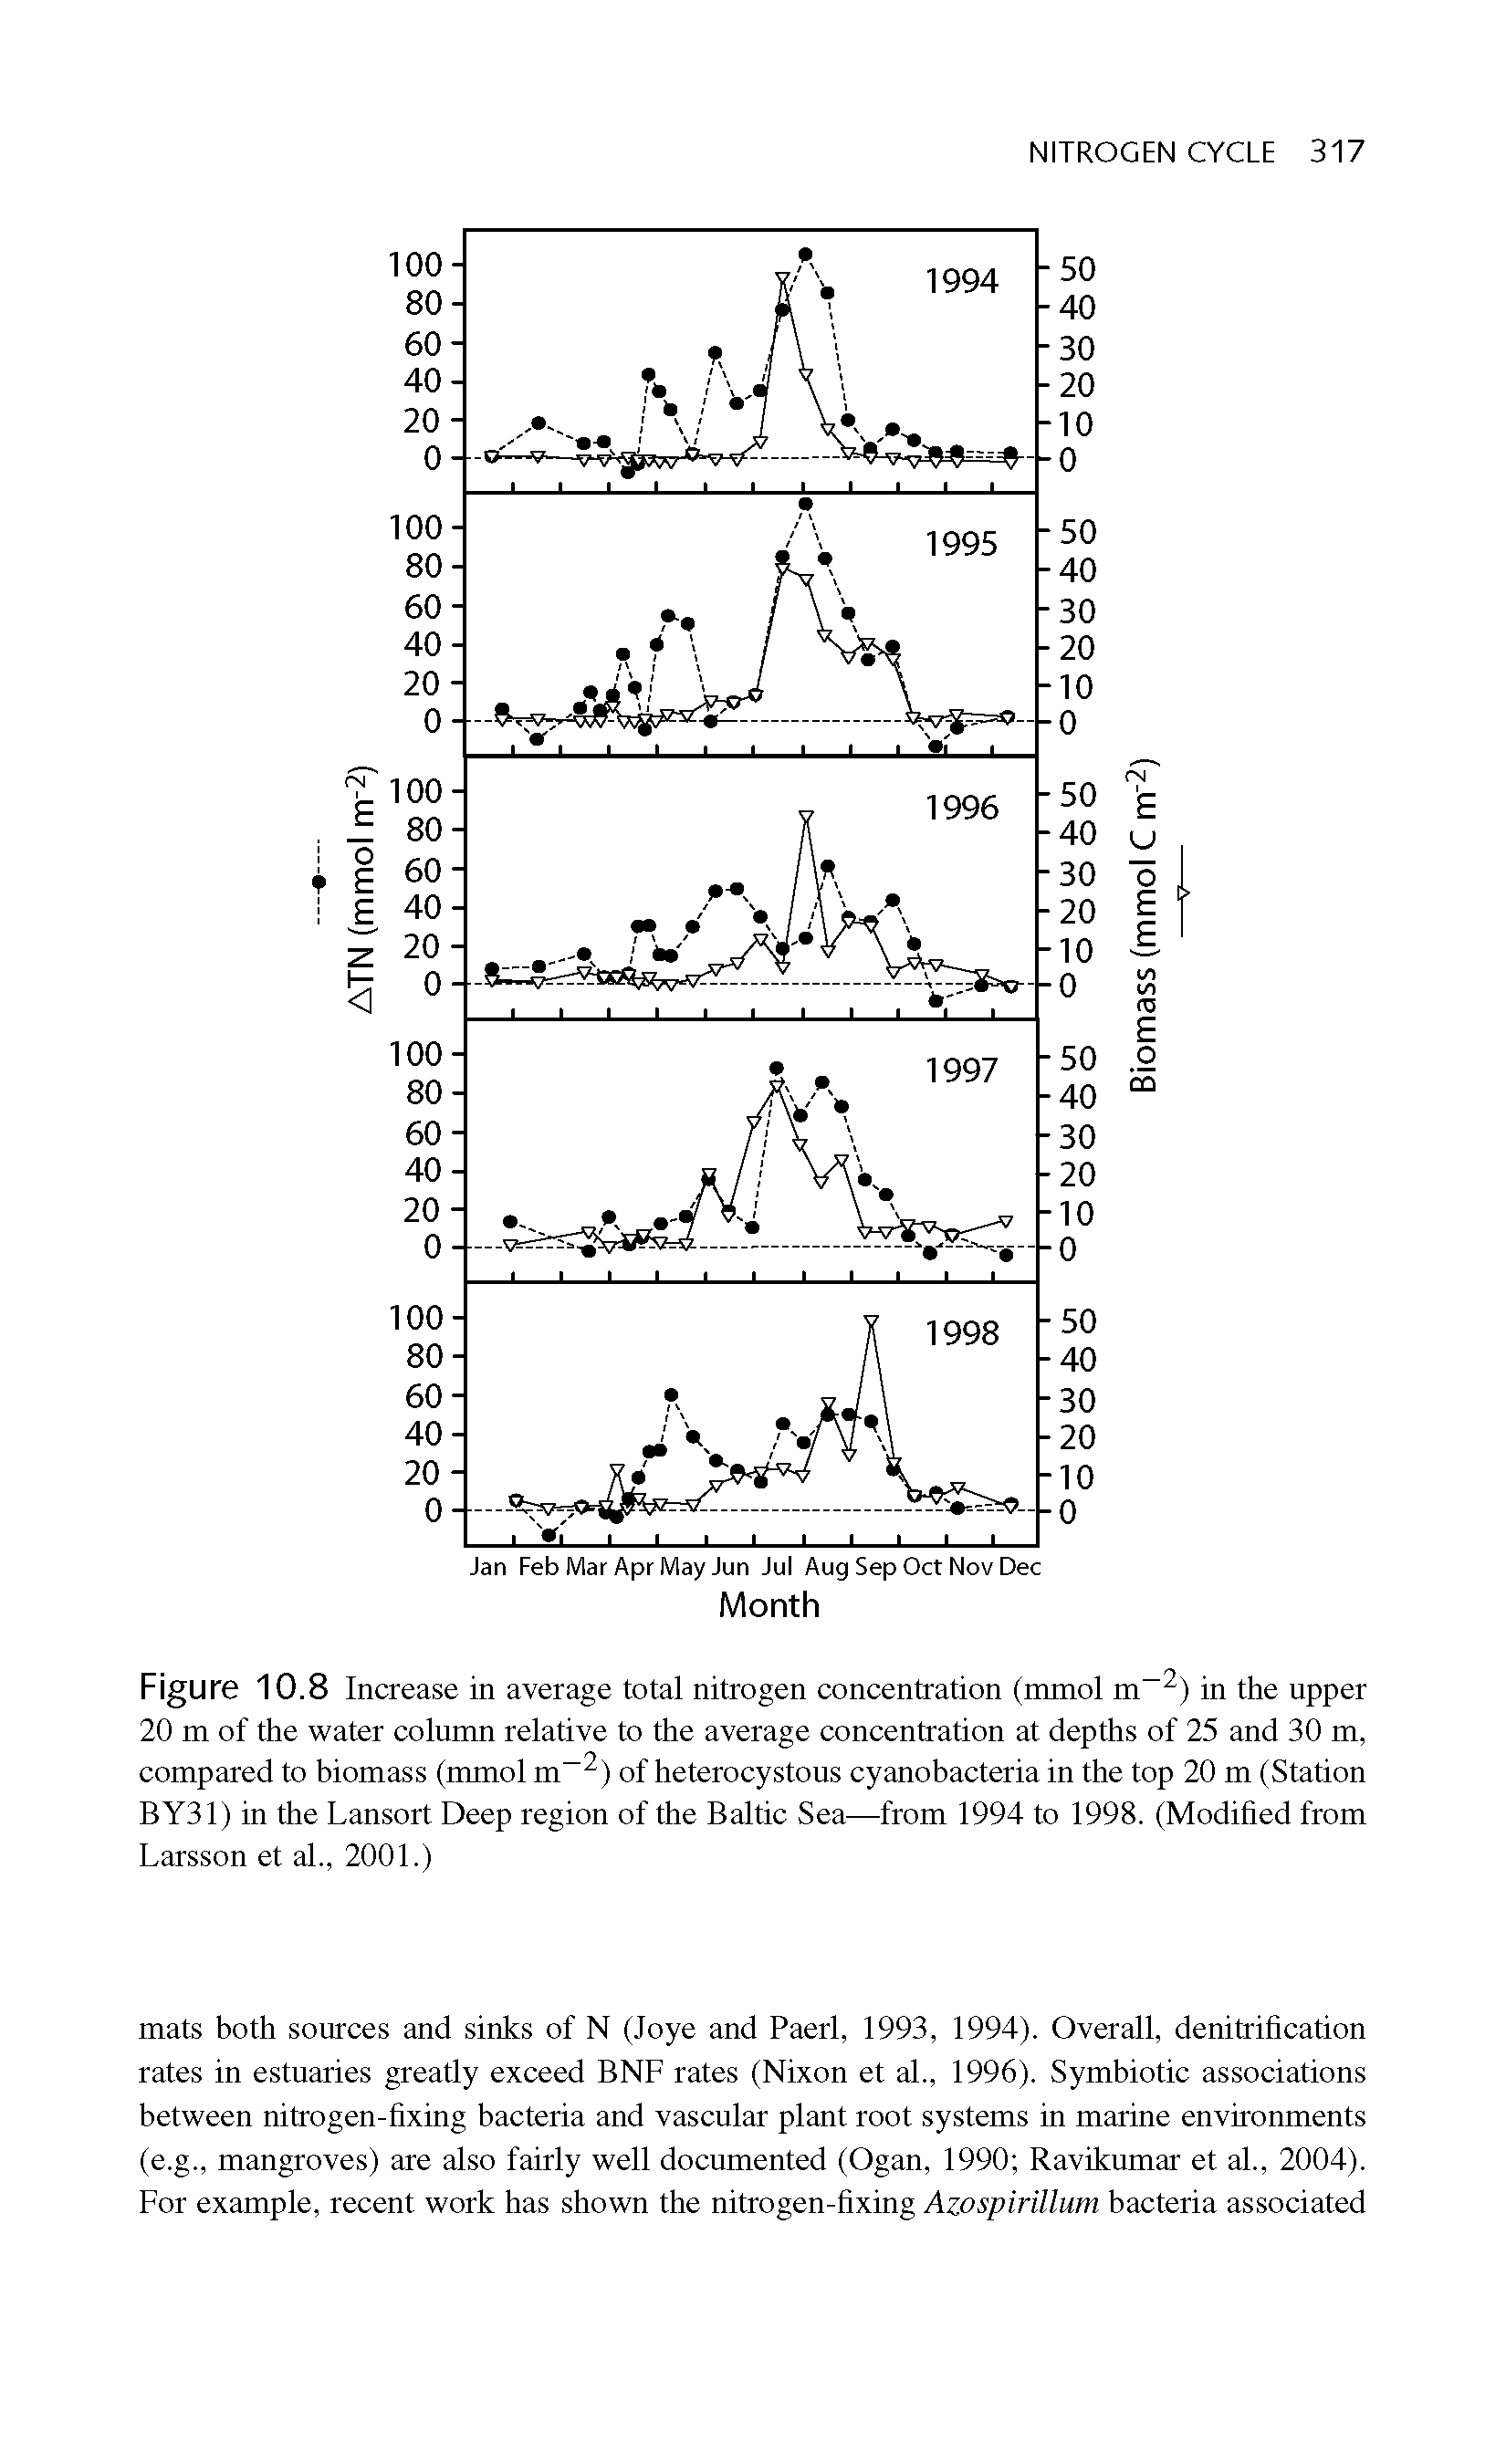 Figure 10.8 Increase in average total nitrogen concentration (mmol m-2) in the upper 20 m of the water column relative to the average concentration at depths of 25 and 30 m, compared to biomass (mmol m-2) of heterocystous cyanobacteria in the top 20 m (Station BY31) in the Lansort Deep region of the Baltic Sea—from 1994 to 1998. (Modified from Larsson et al., 2001.)...